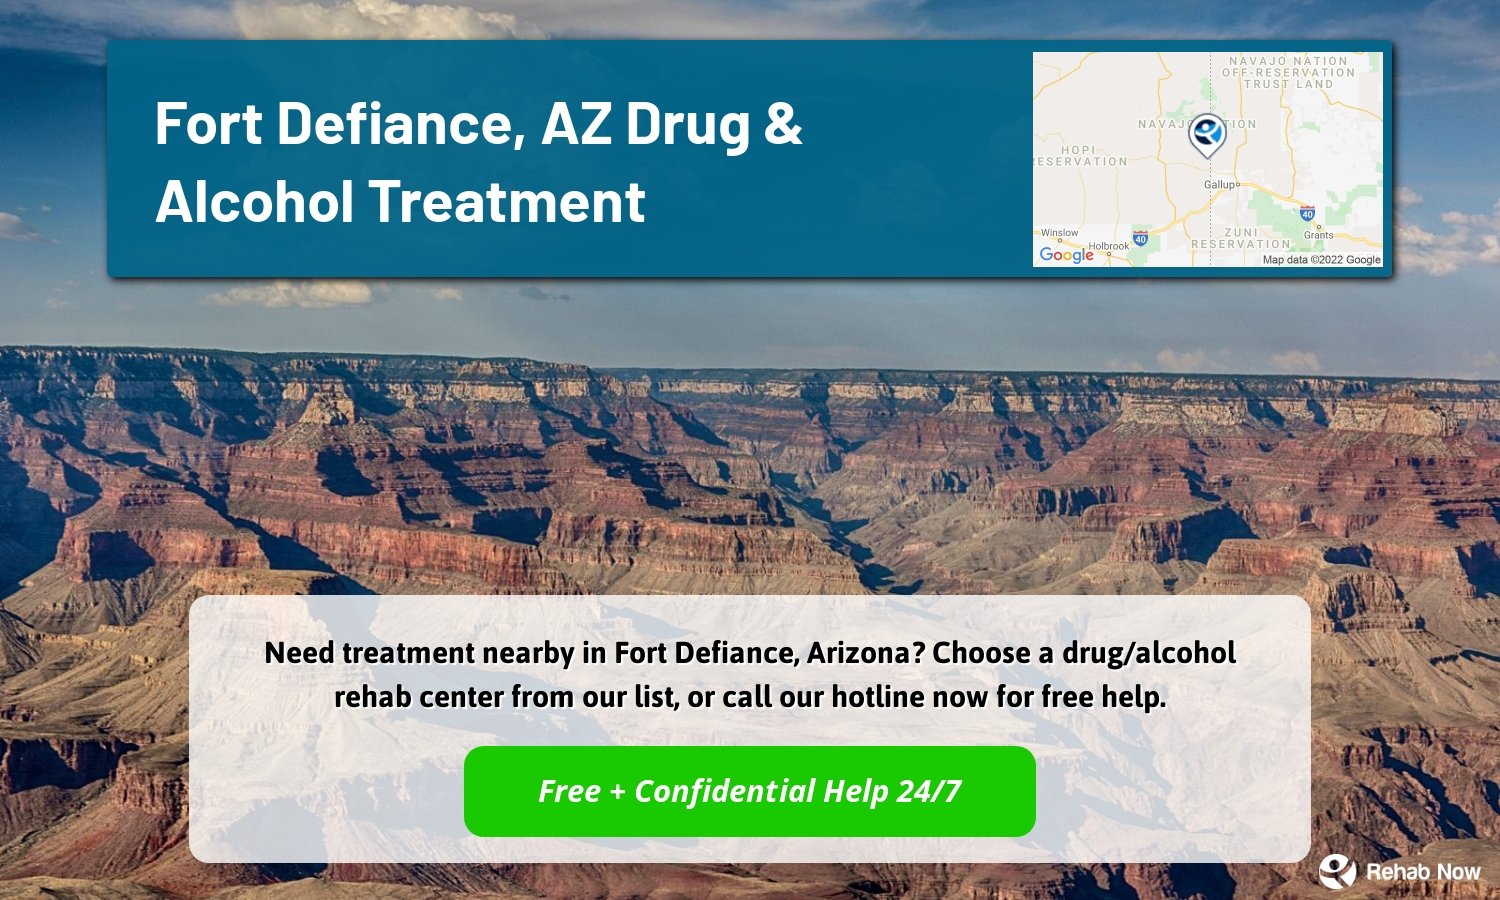 Need treatment nearby in Fort Defiance, Arizona? Choose a drug/alcohol rehab center from our list, or call our hotline now for free help.